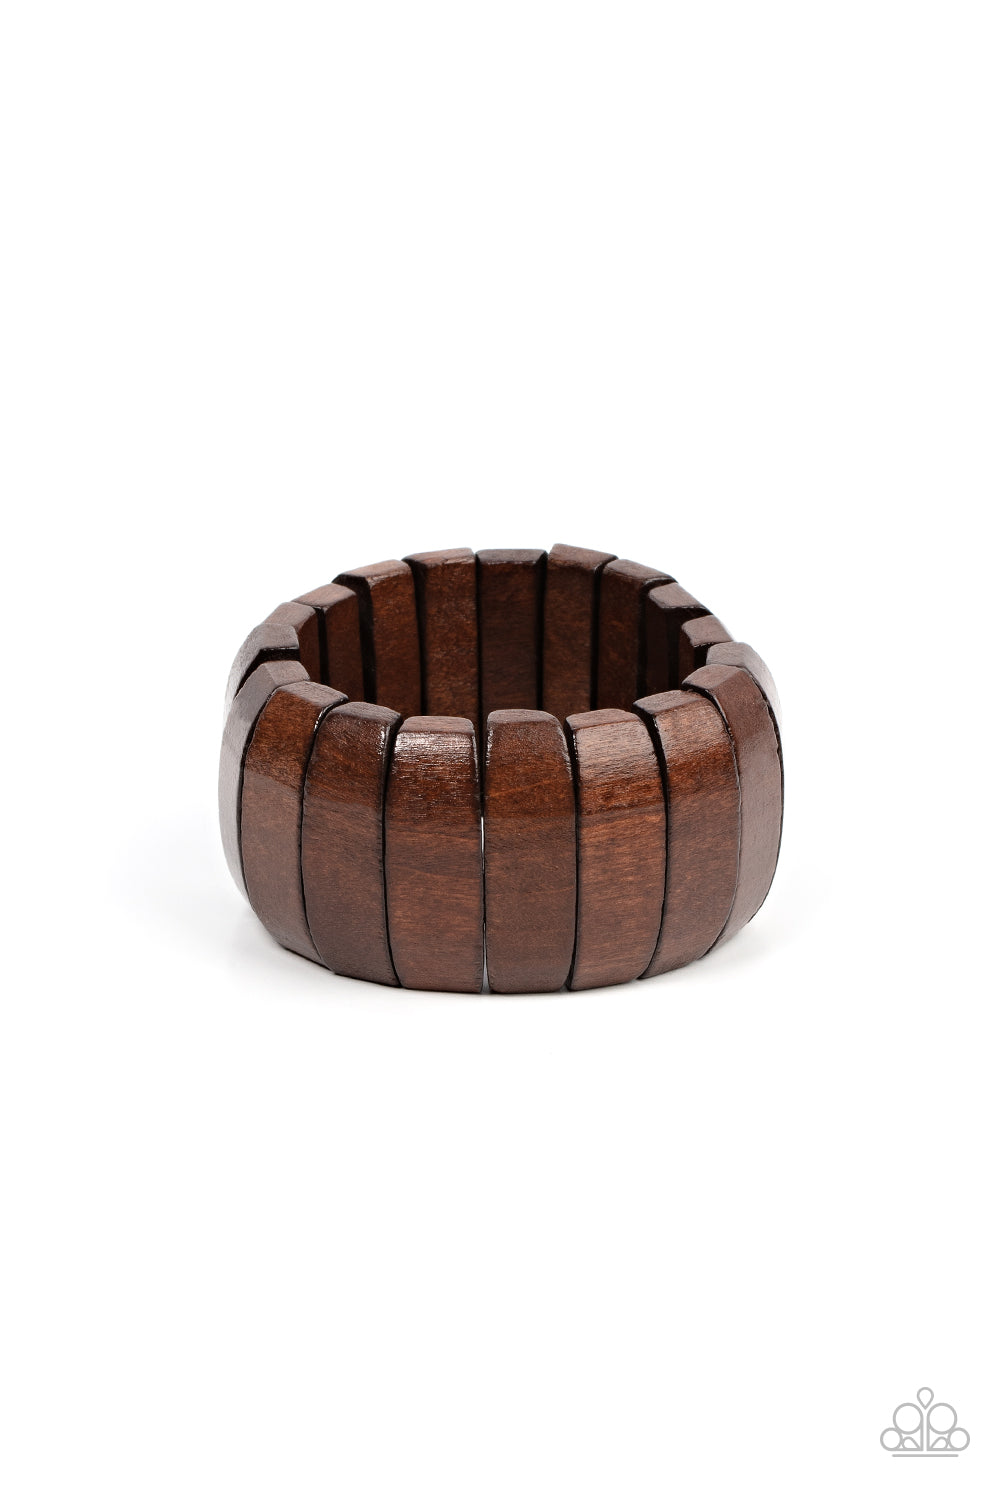 Boardwalk Bonanza Brown Wooden Bracelet - Paparazzi Accessories  Smooth brown wooden panels are threaded along stretchy bands creating a tropical vibe as they fall around the wrist.  Sold as one individual bracelet.